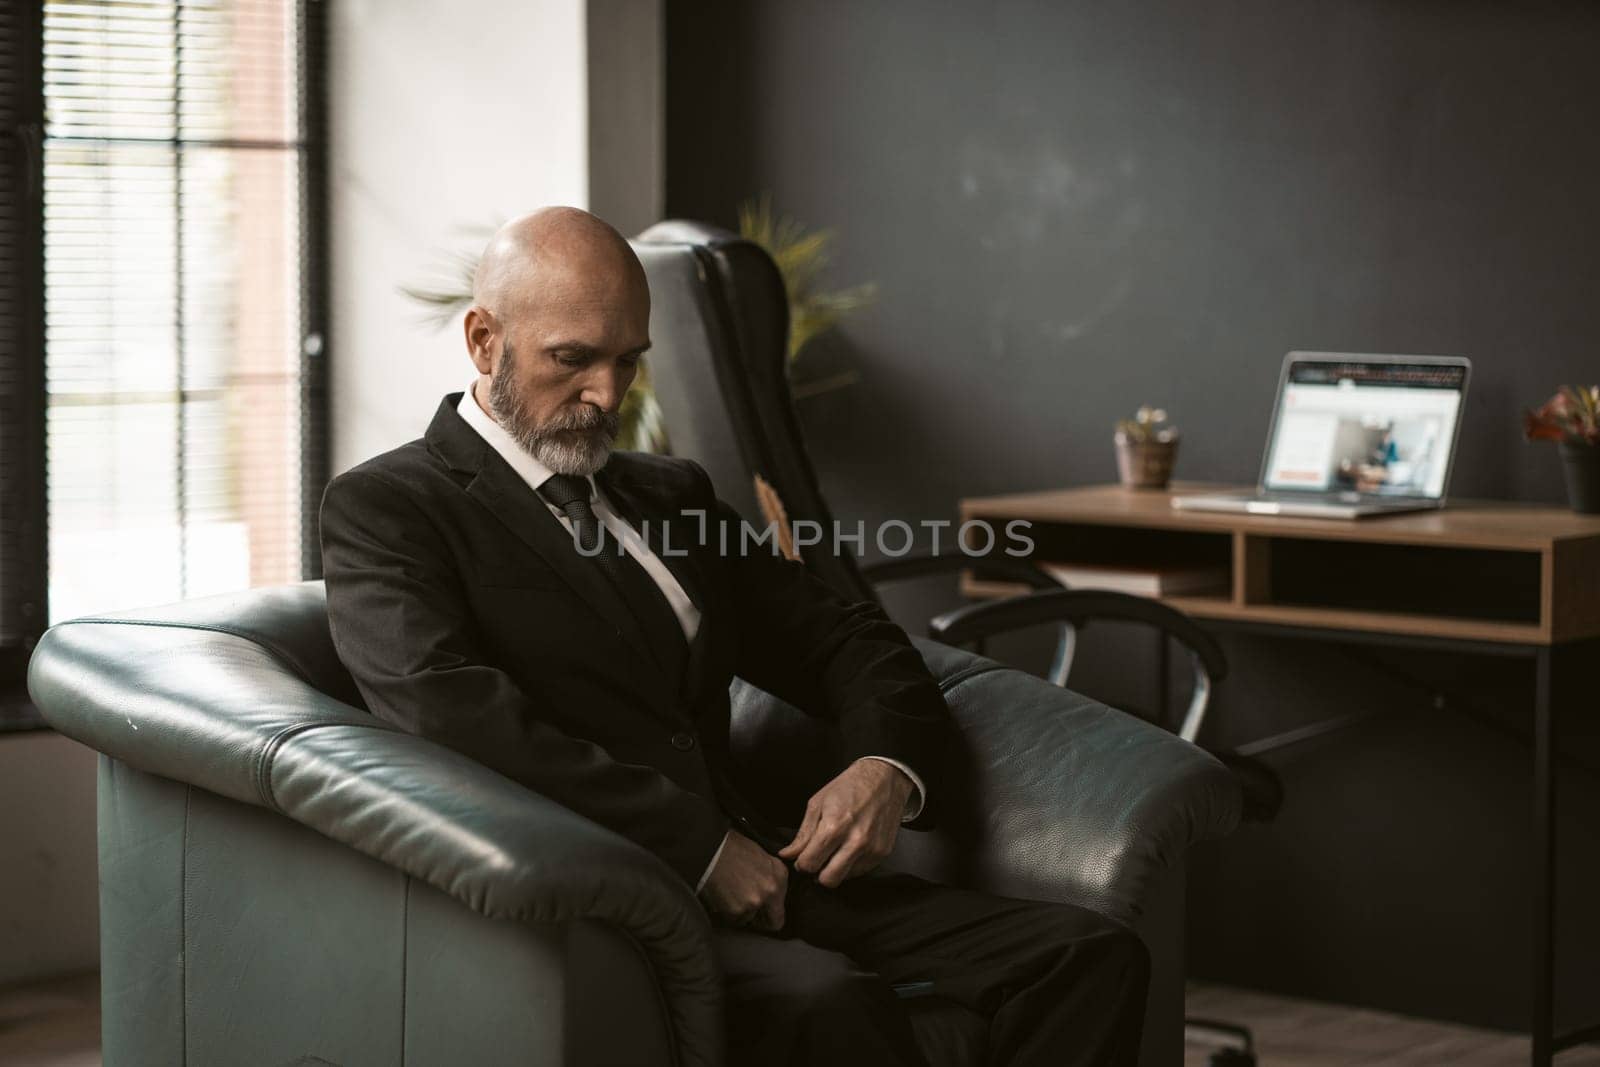 sad and contemplative old mature senior man sits in dignified leather chair. Dressed in suit, exudes sense of professionalism and experience, as he reflects on thoughts in solitude of room. High quality photo